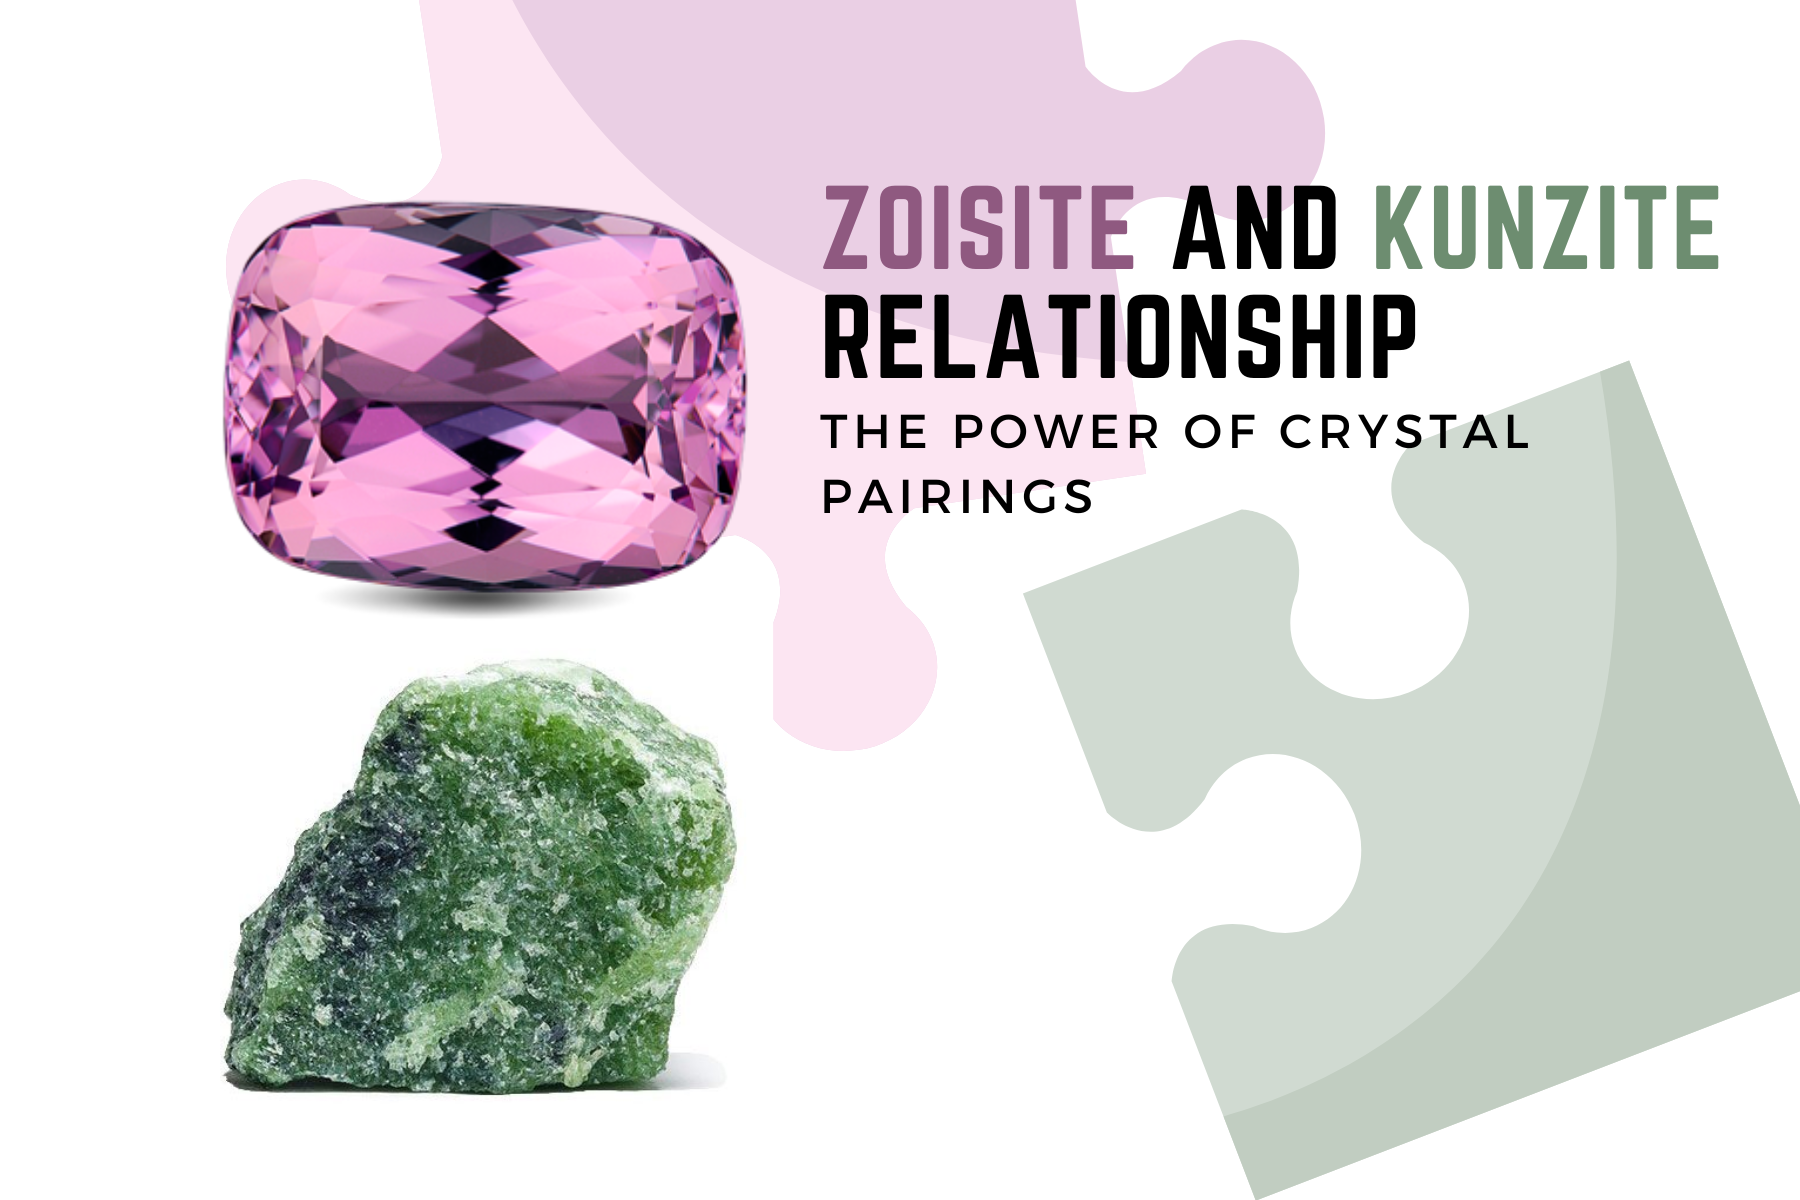 Zoisite And Kunzite Relationship - The Power Of Crystal Pairings